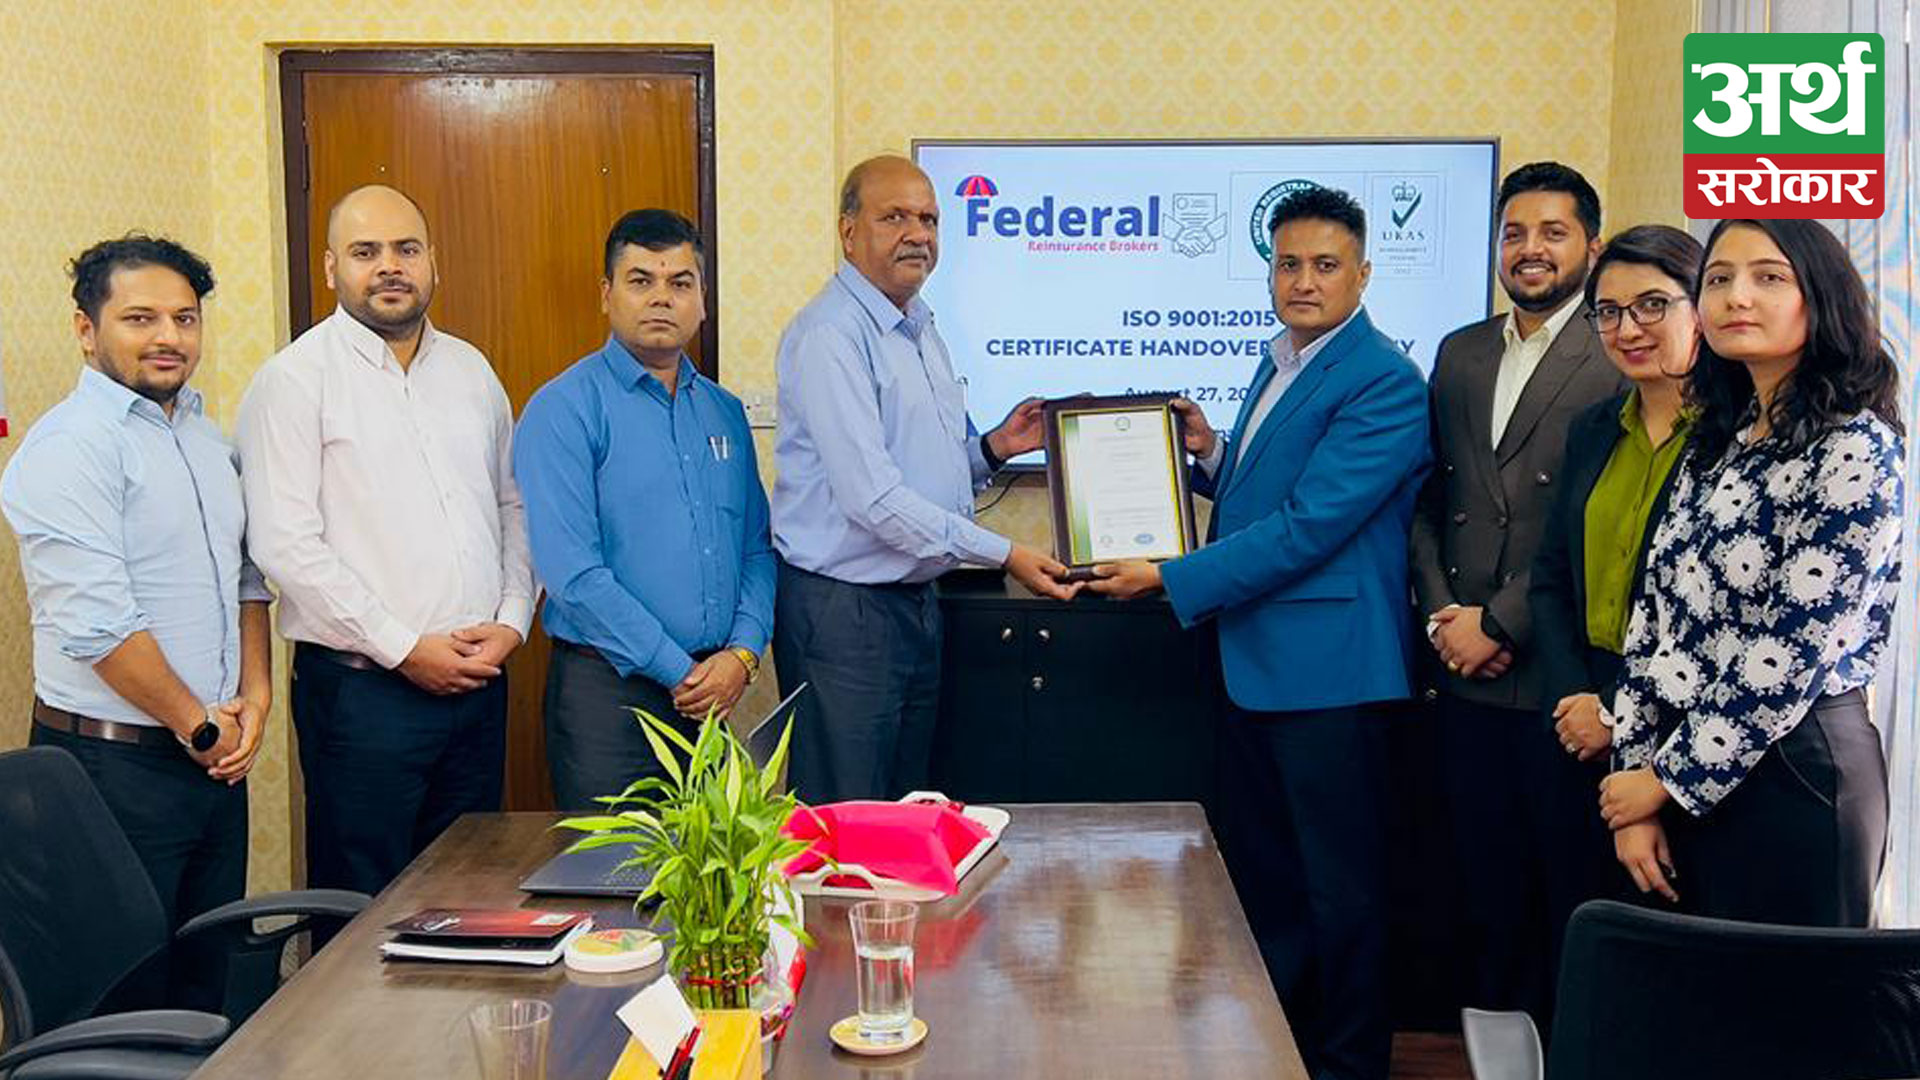 Federal Becomes 1st Reinsurance Broker in Nepal to Obtain ISO 9001:2015 Certification